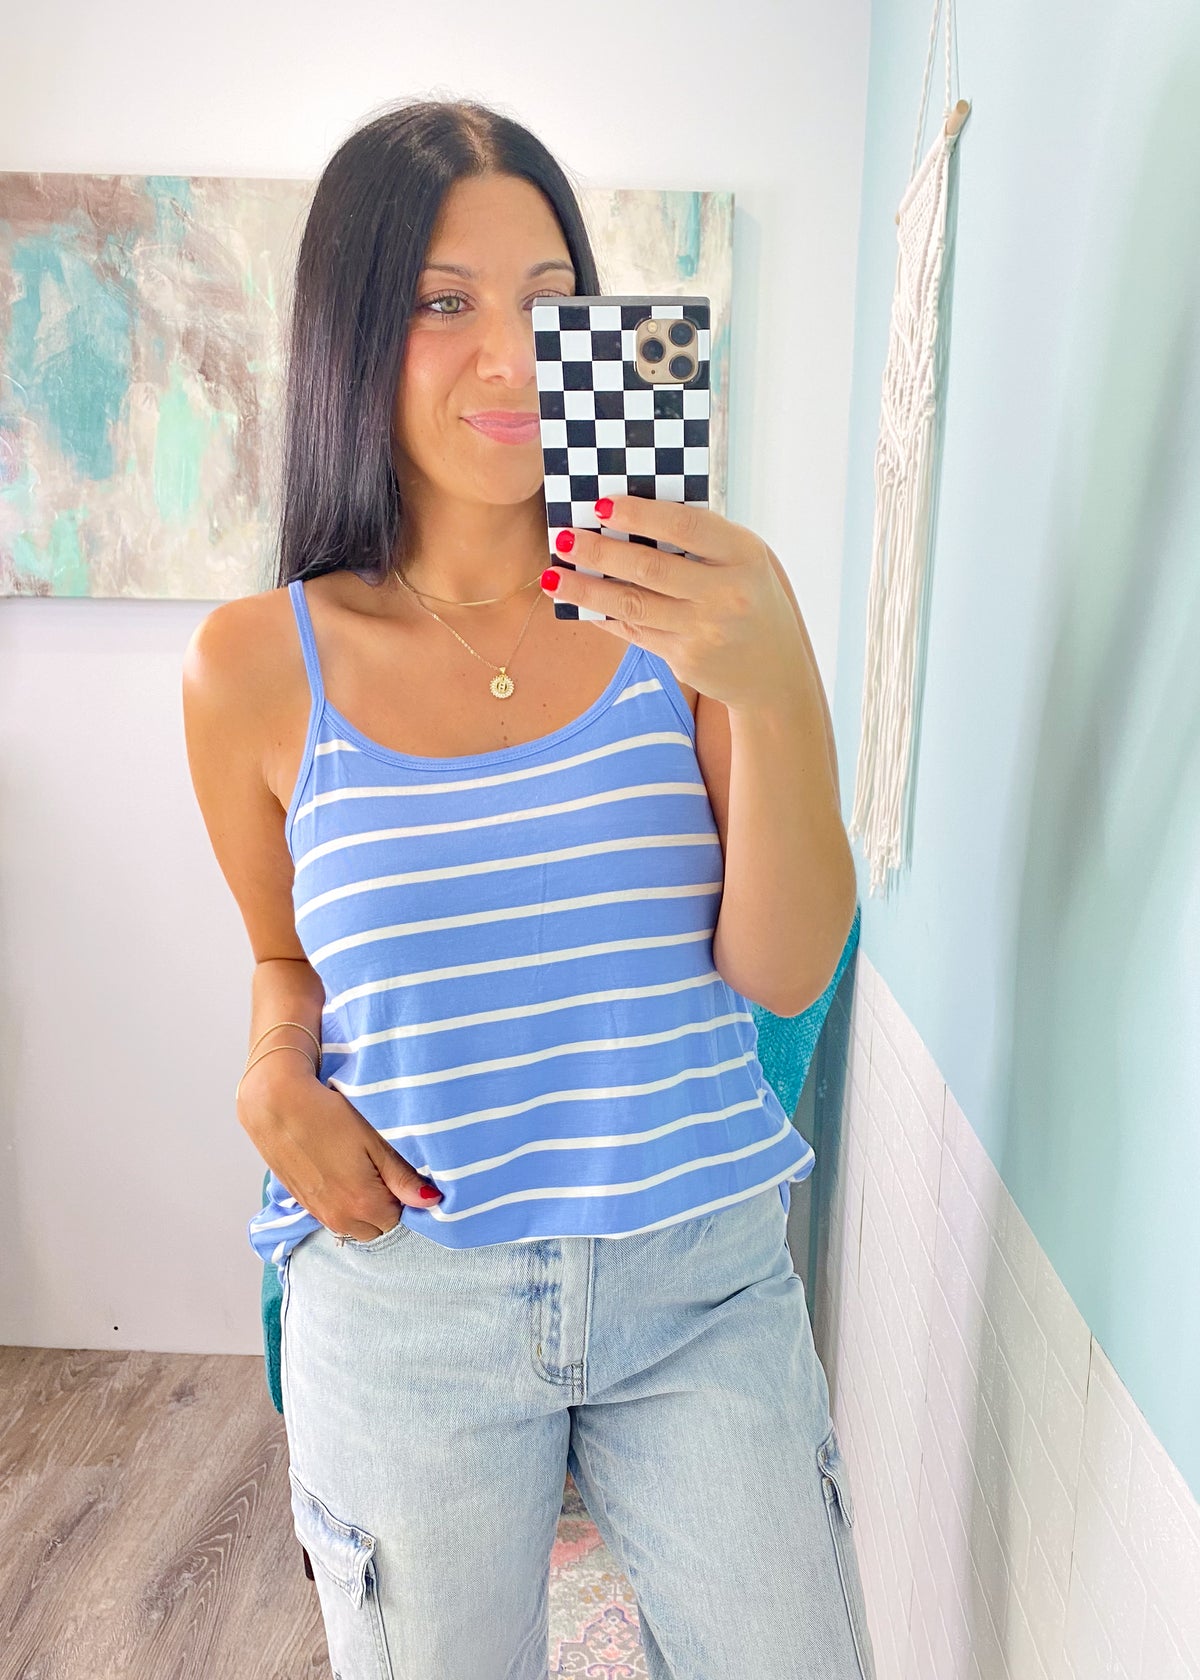 'Breezeway' Light Blue & White Stripe Reversible Cami Tank-Airy and breezy, this adorable tank in soft blue and white stripe colors is perfect to throw on and go all Summer. Wear the v-neck or scoop neck front for different looks. Tuck in or wear untucked. Great to lay or wear alone.-Cali Moon Boutique, Plainville Connecticut